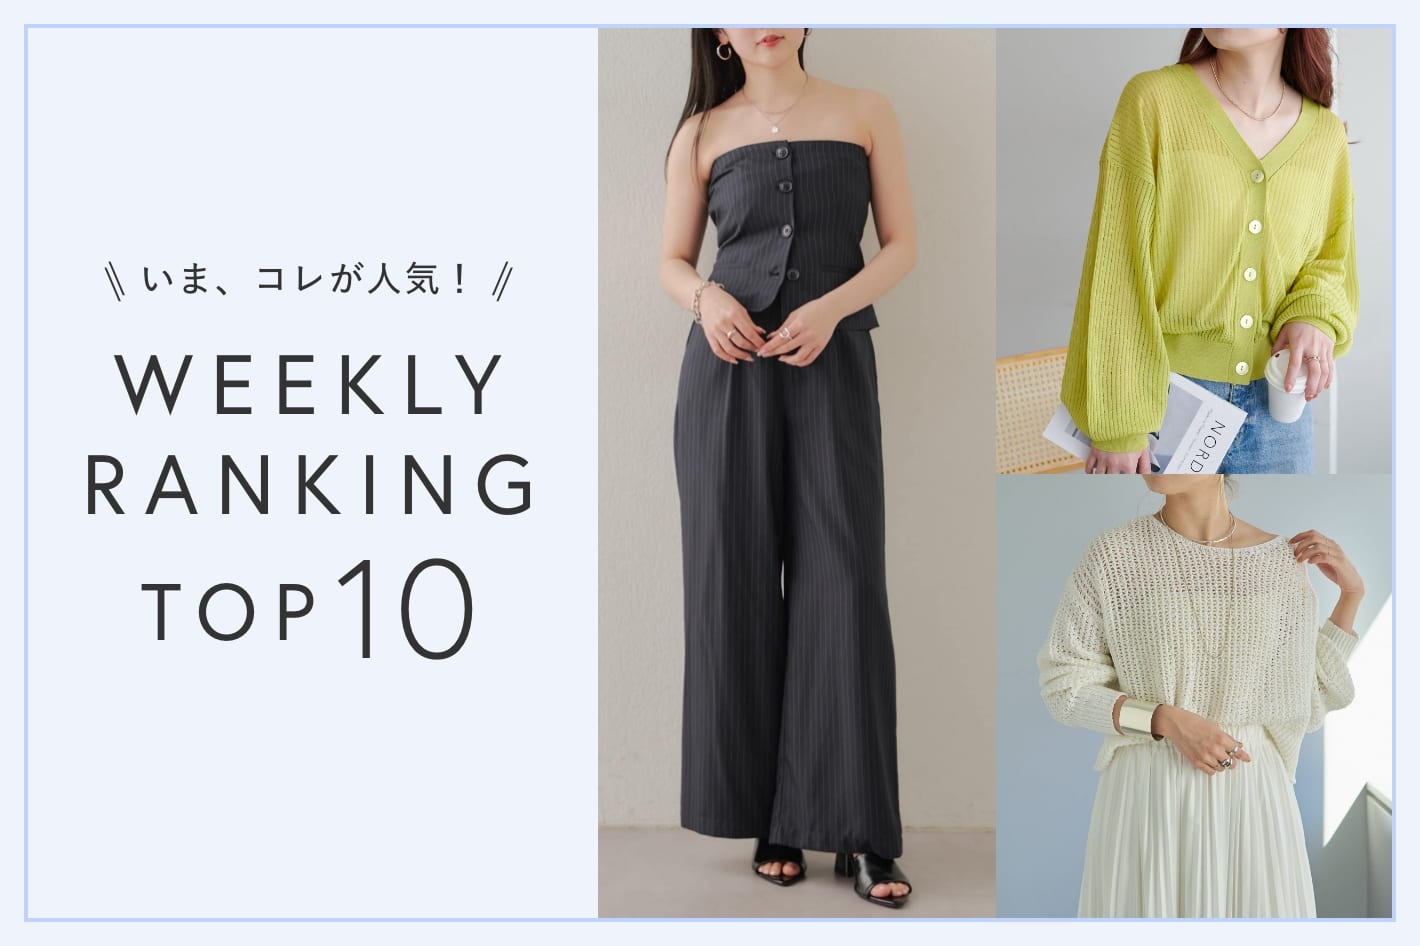 OUTLET いま、これが人気！WEEKLY RANKING TOP10！【5/14更新】